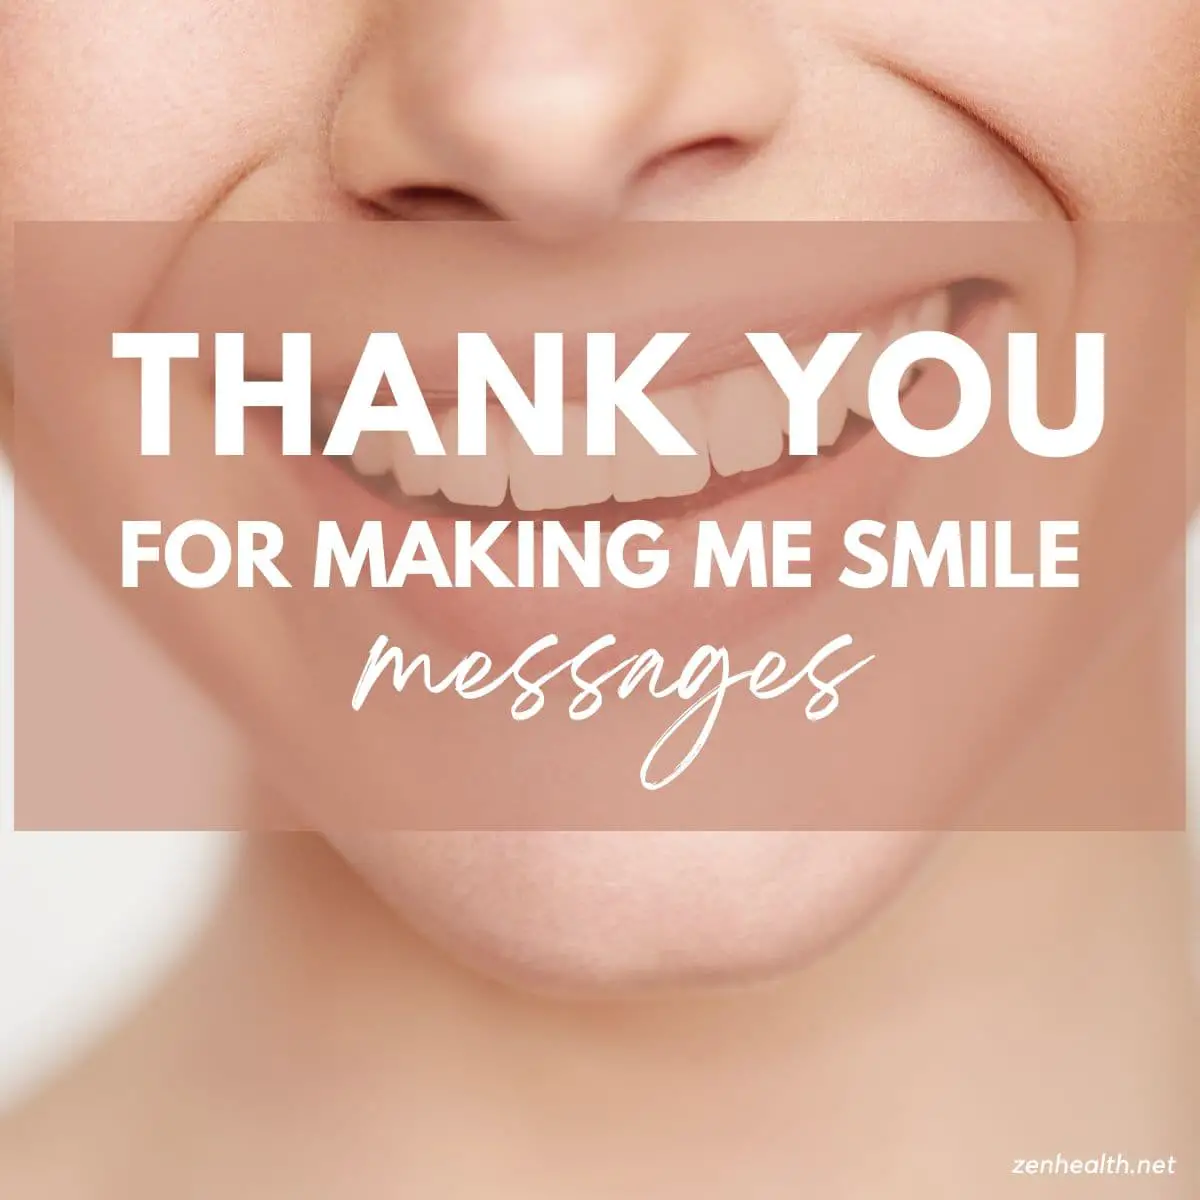 thank you for making me smile messages text overlay on the face of a woman smiling